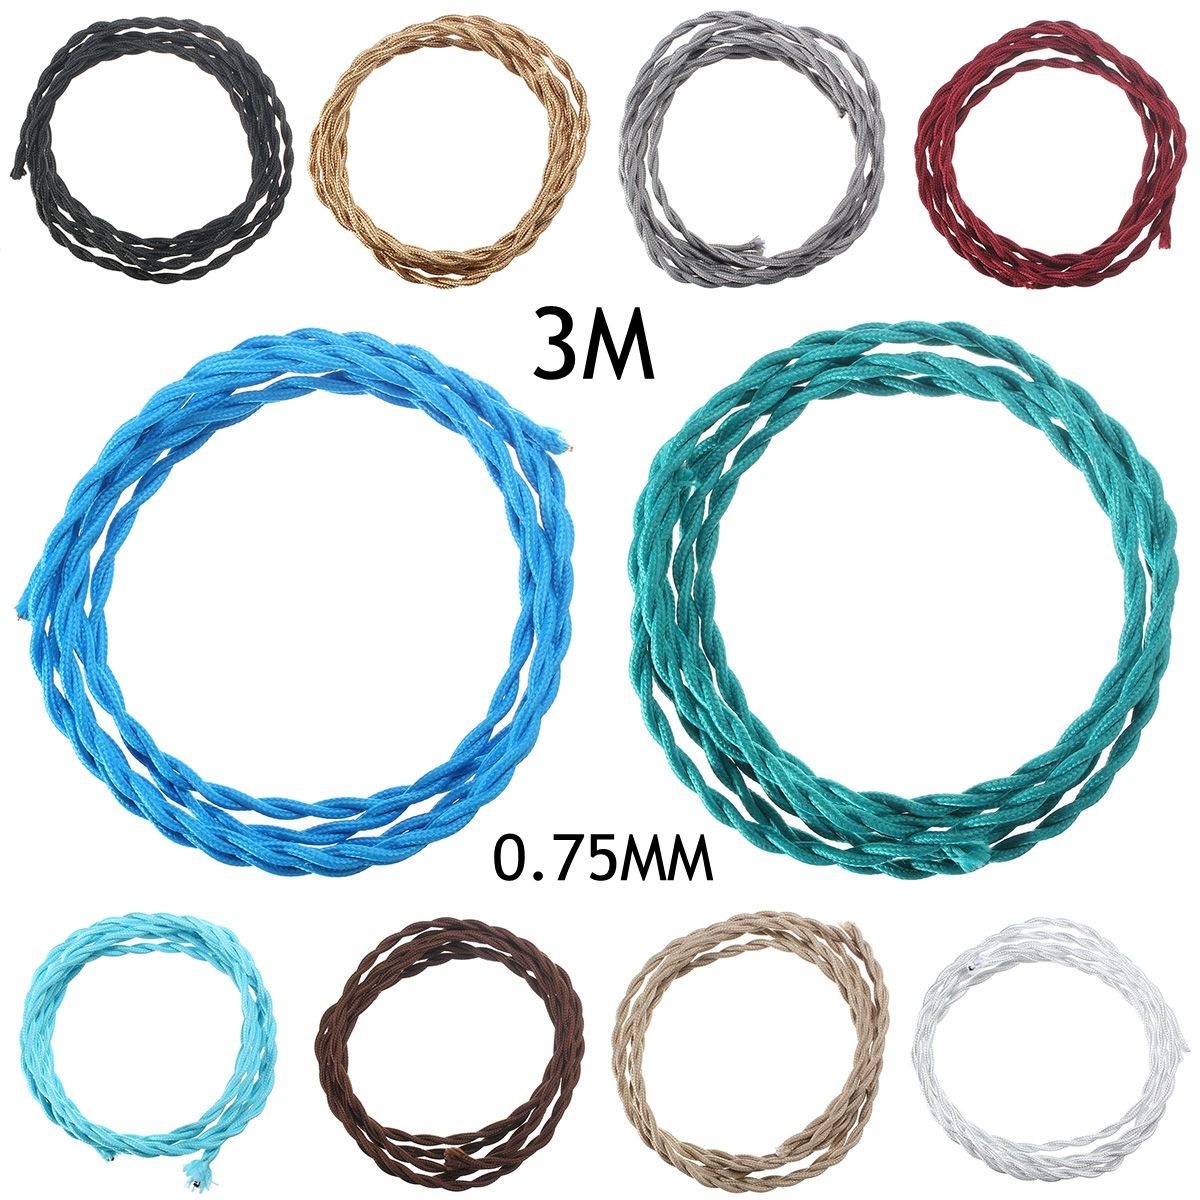 3M-Vintage-2-Core-Twist-Braided-Fabric-Cable-Wire-Electric-Lighting-Cord-1068748